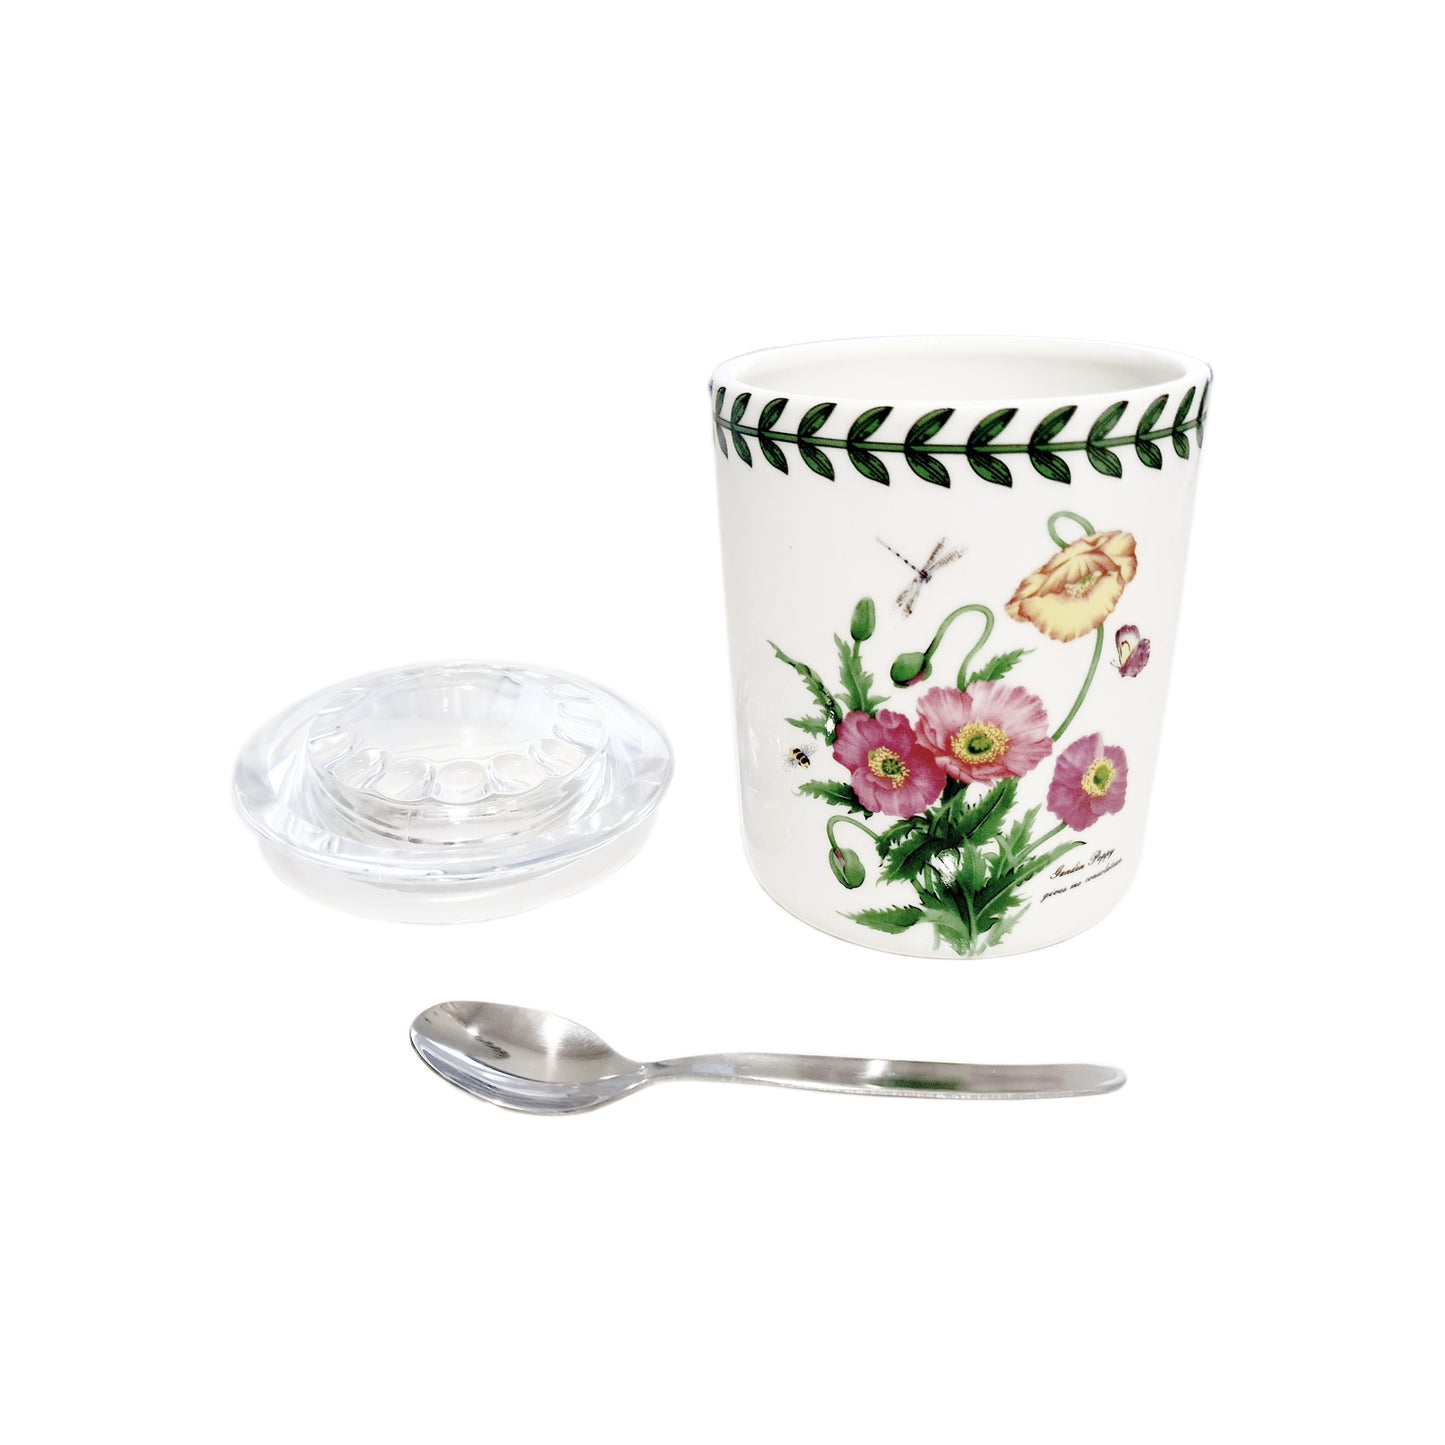 [Bone China] Floral Garden 3 Pcs Spice Jars with spice spoon and rack Set (7P) 𝟓𝟎% 𝐎𝐅𝐅